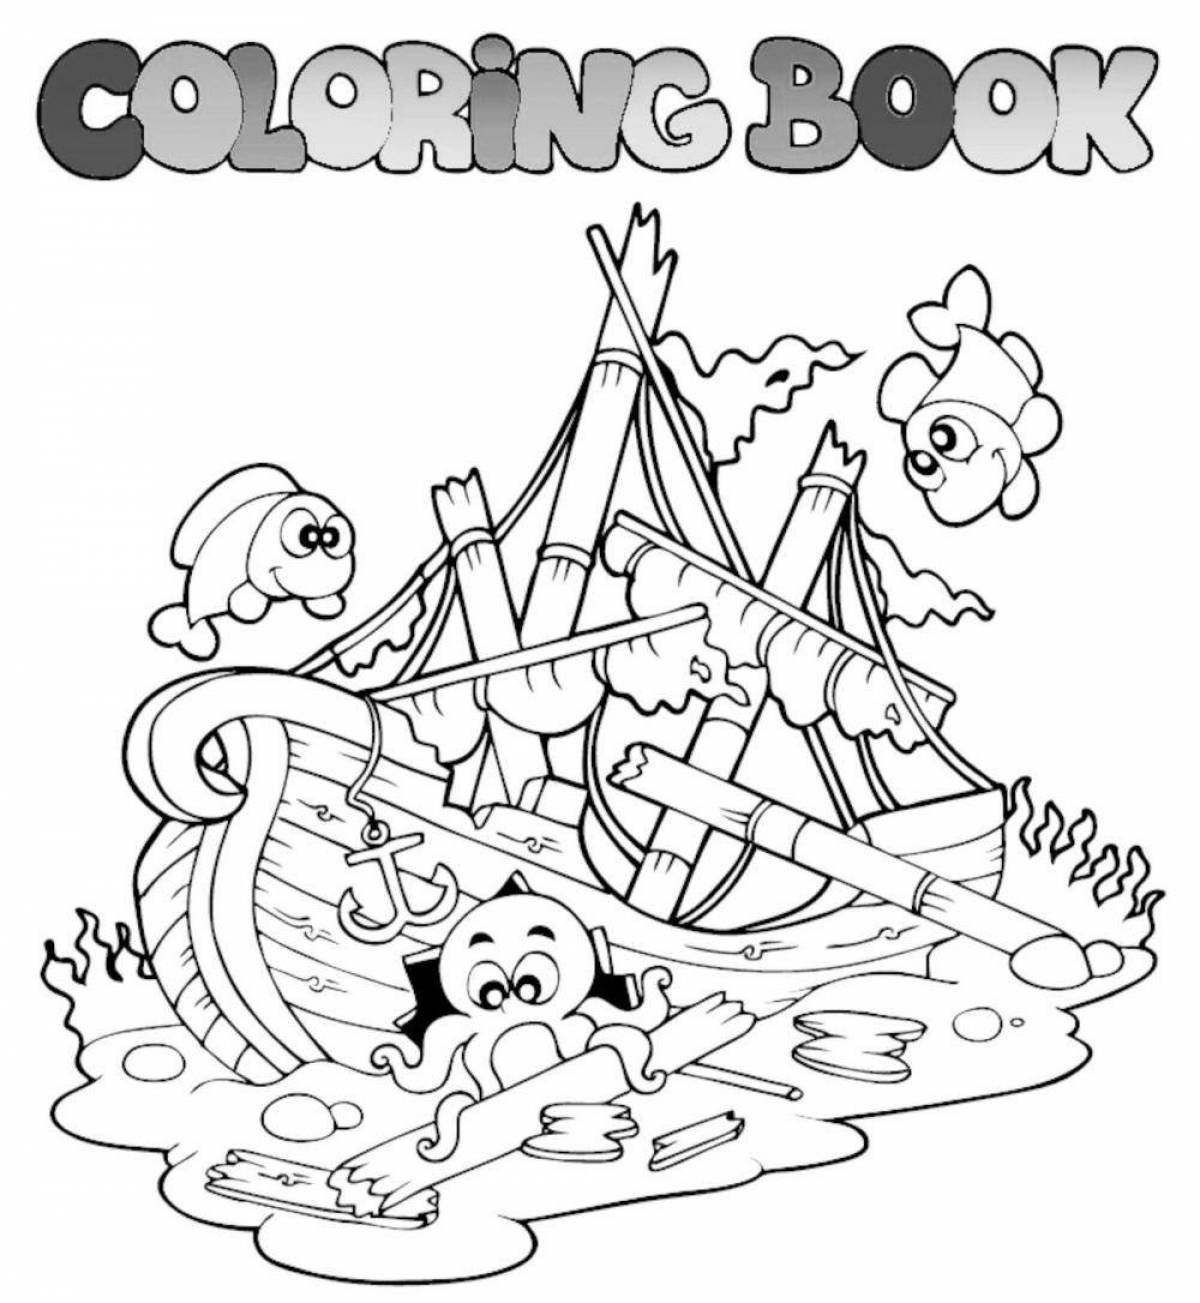 Awesome shipwreck coloring page